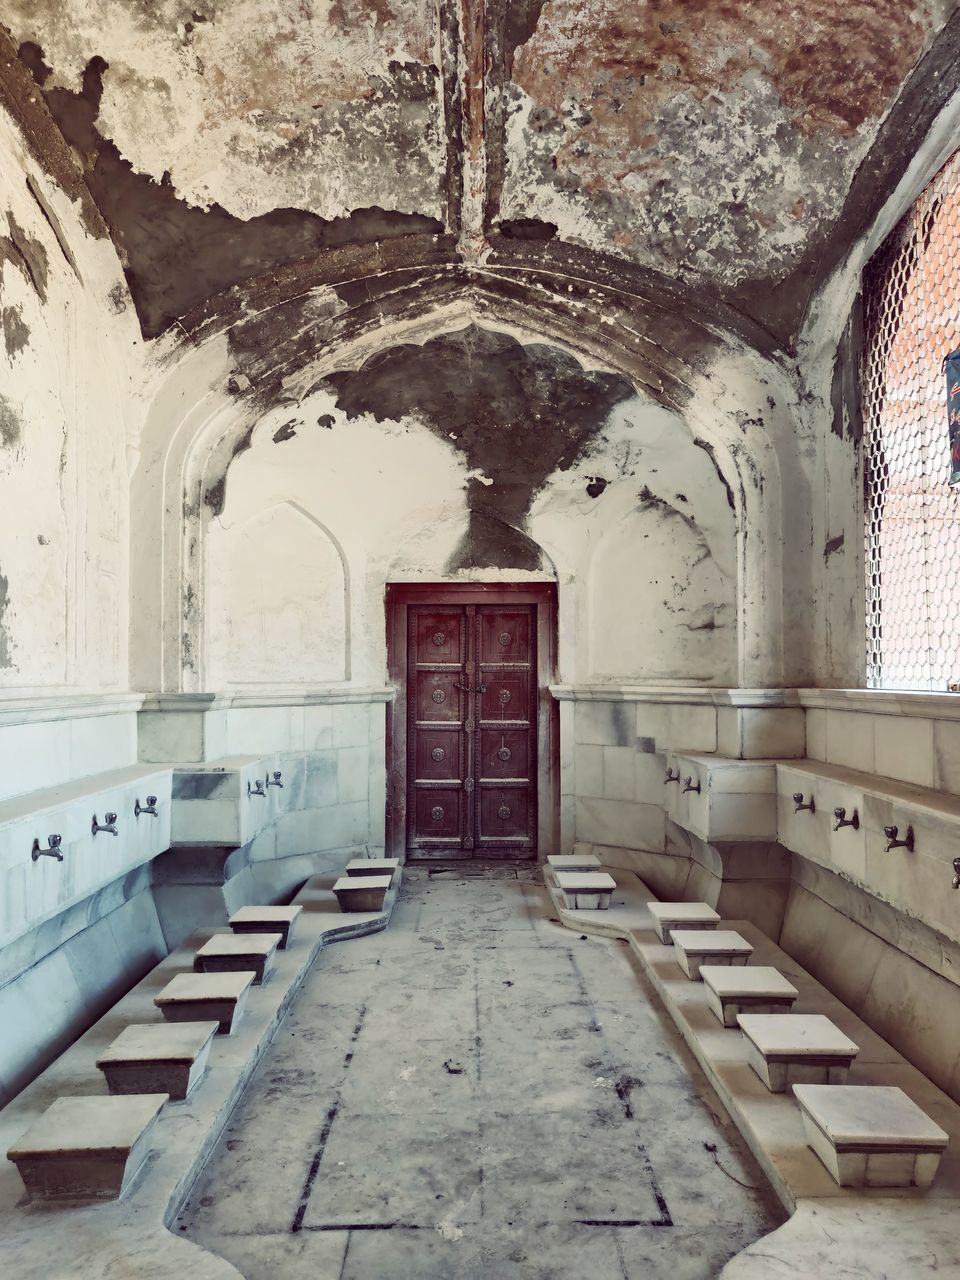 architecture, indoors, building, built structure, arch, no people, abandoned, old, ceiling, window, day, door, the past, absence, weathered, entrance, history, empty, wall - building feature, damaged